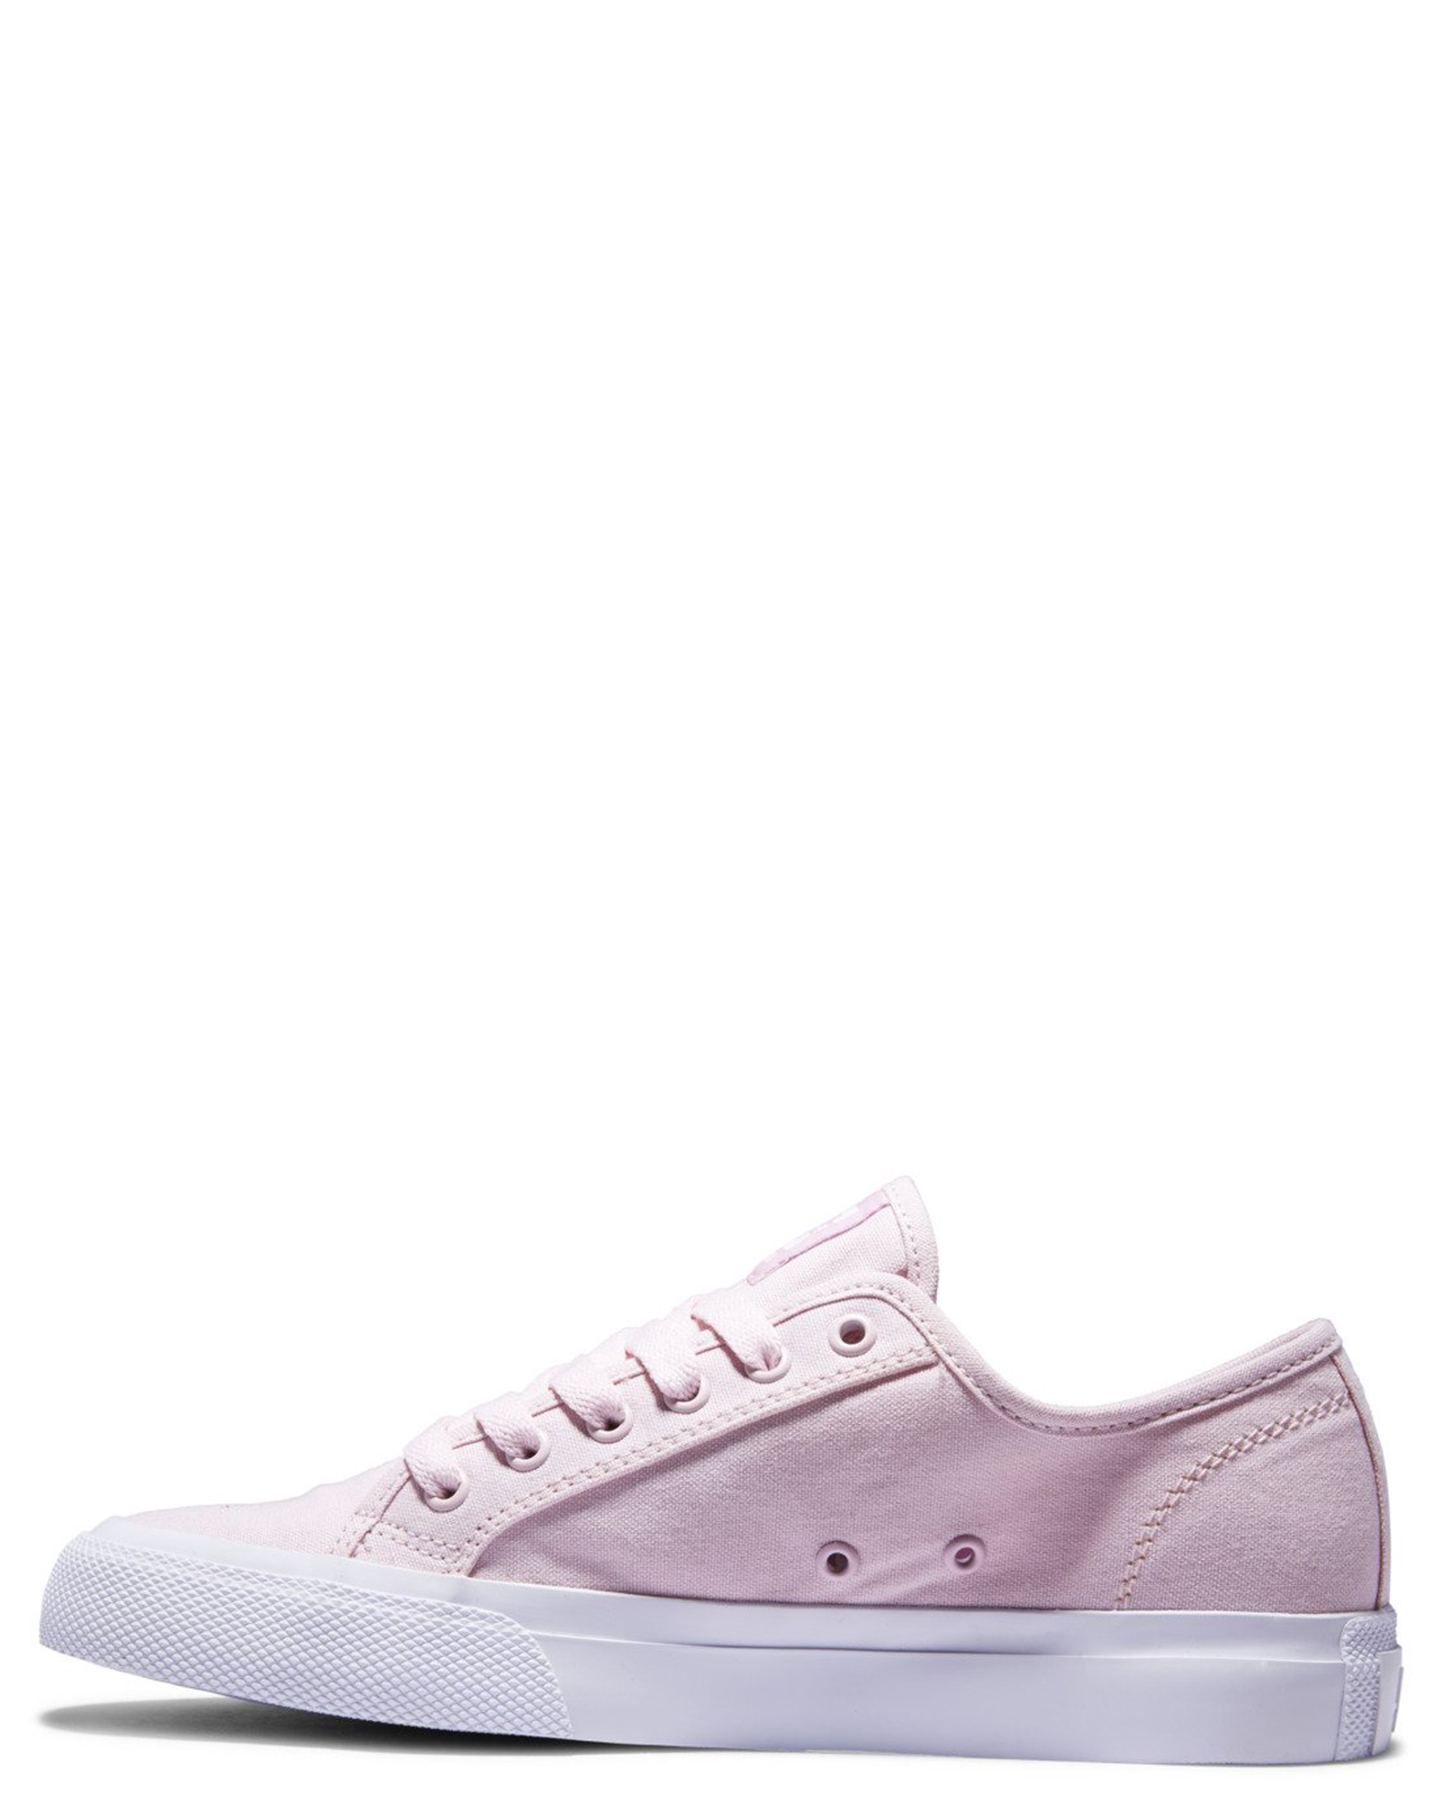 Dc Shoes Womens Manual Shoe - Light Pink | SurfStitch